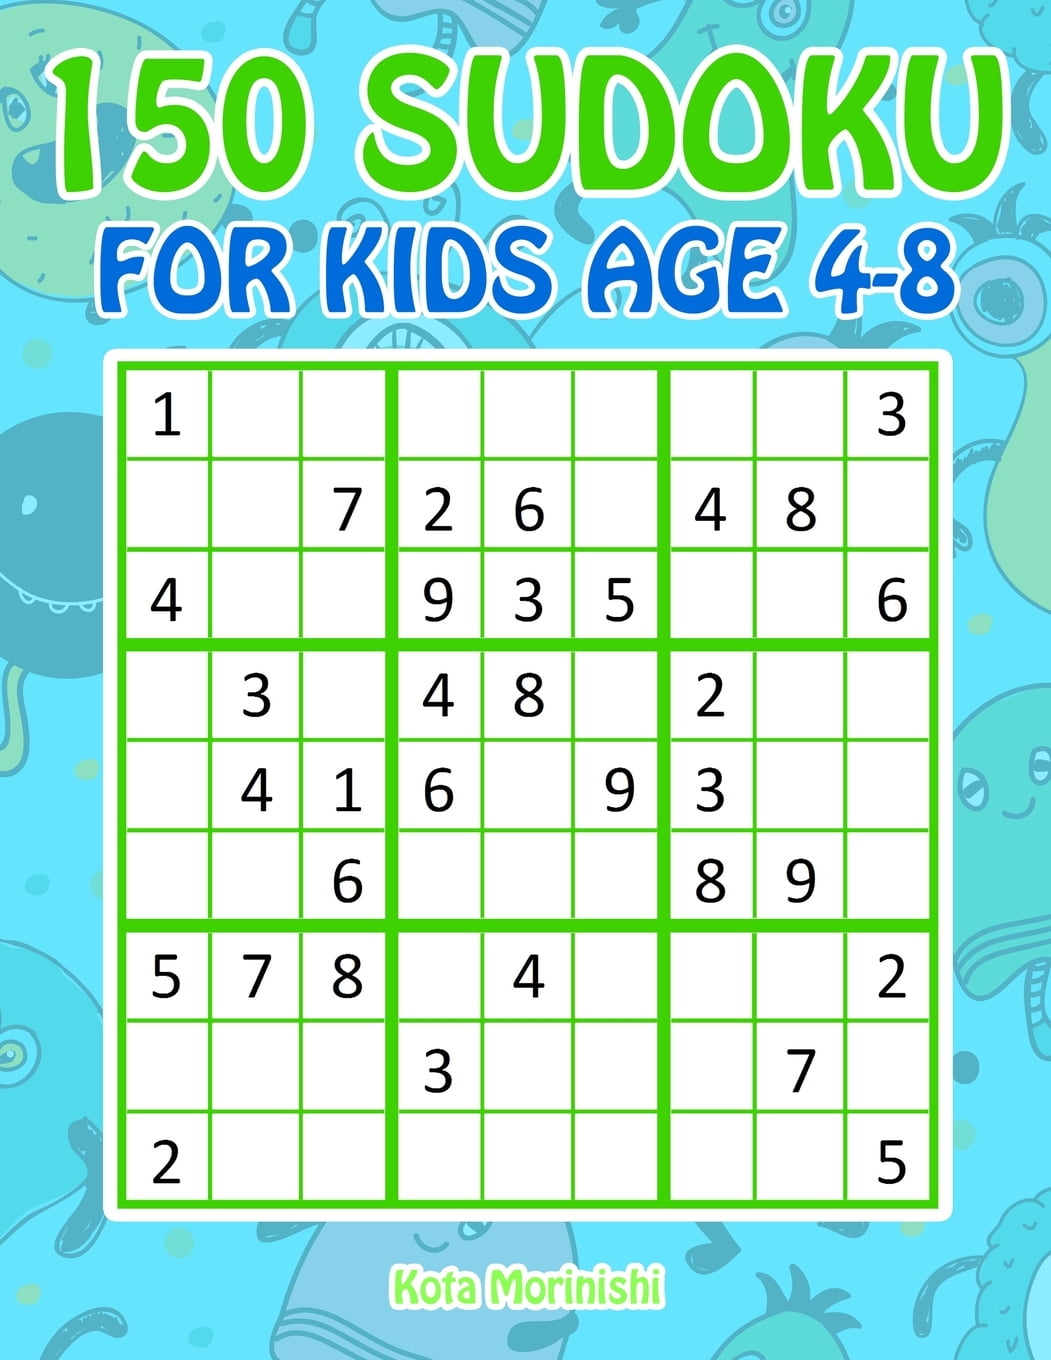 sudoku-puzzle-books-for-kids-150-sudoku-for-kids-ages-4-8-sudoku-with